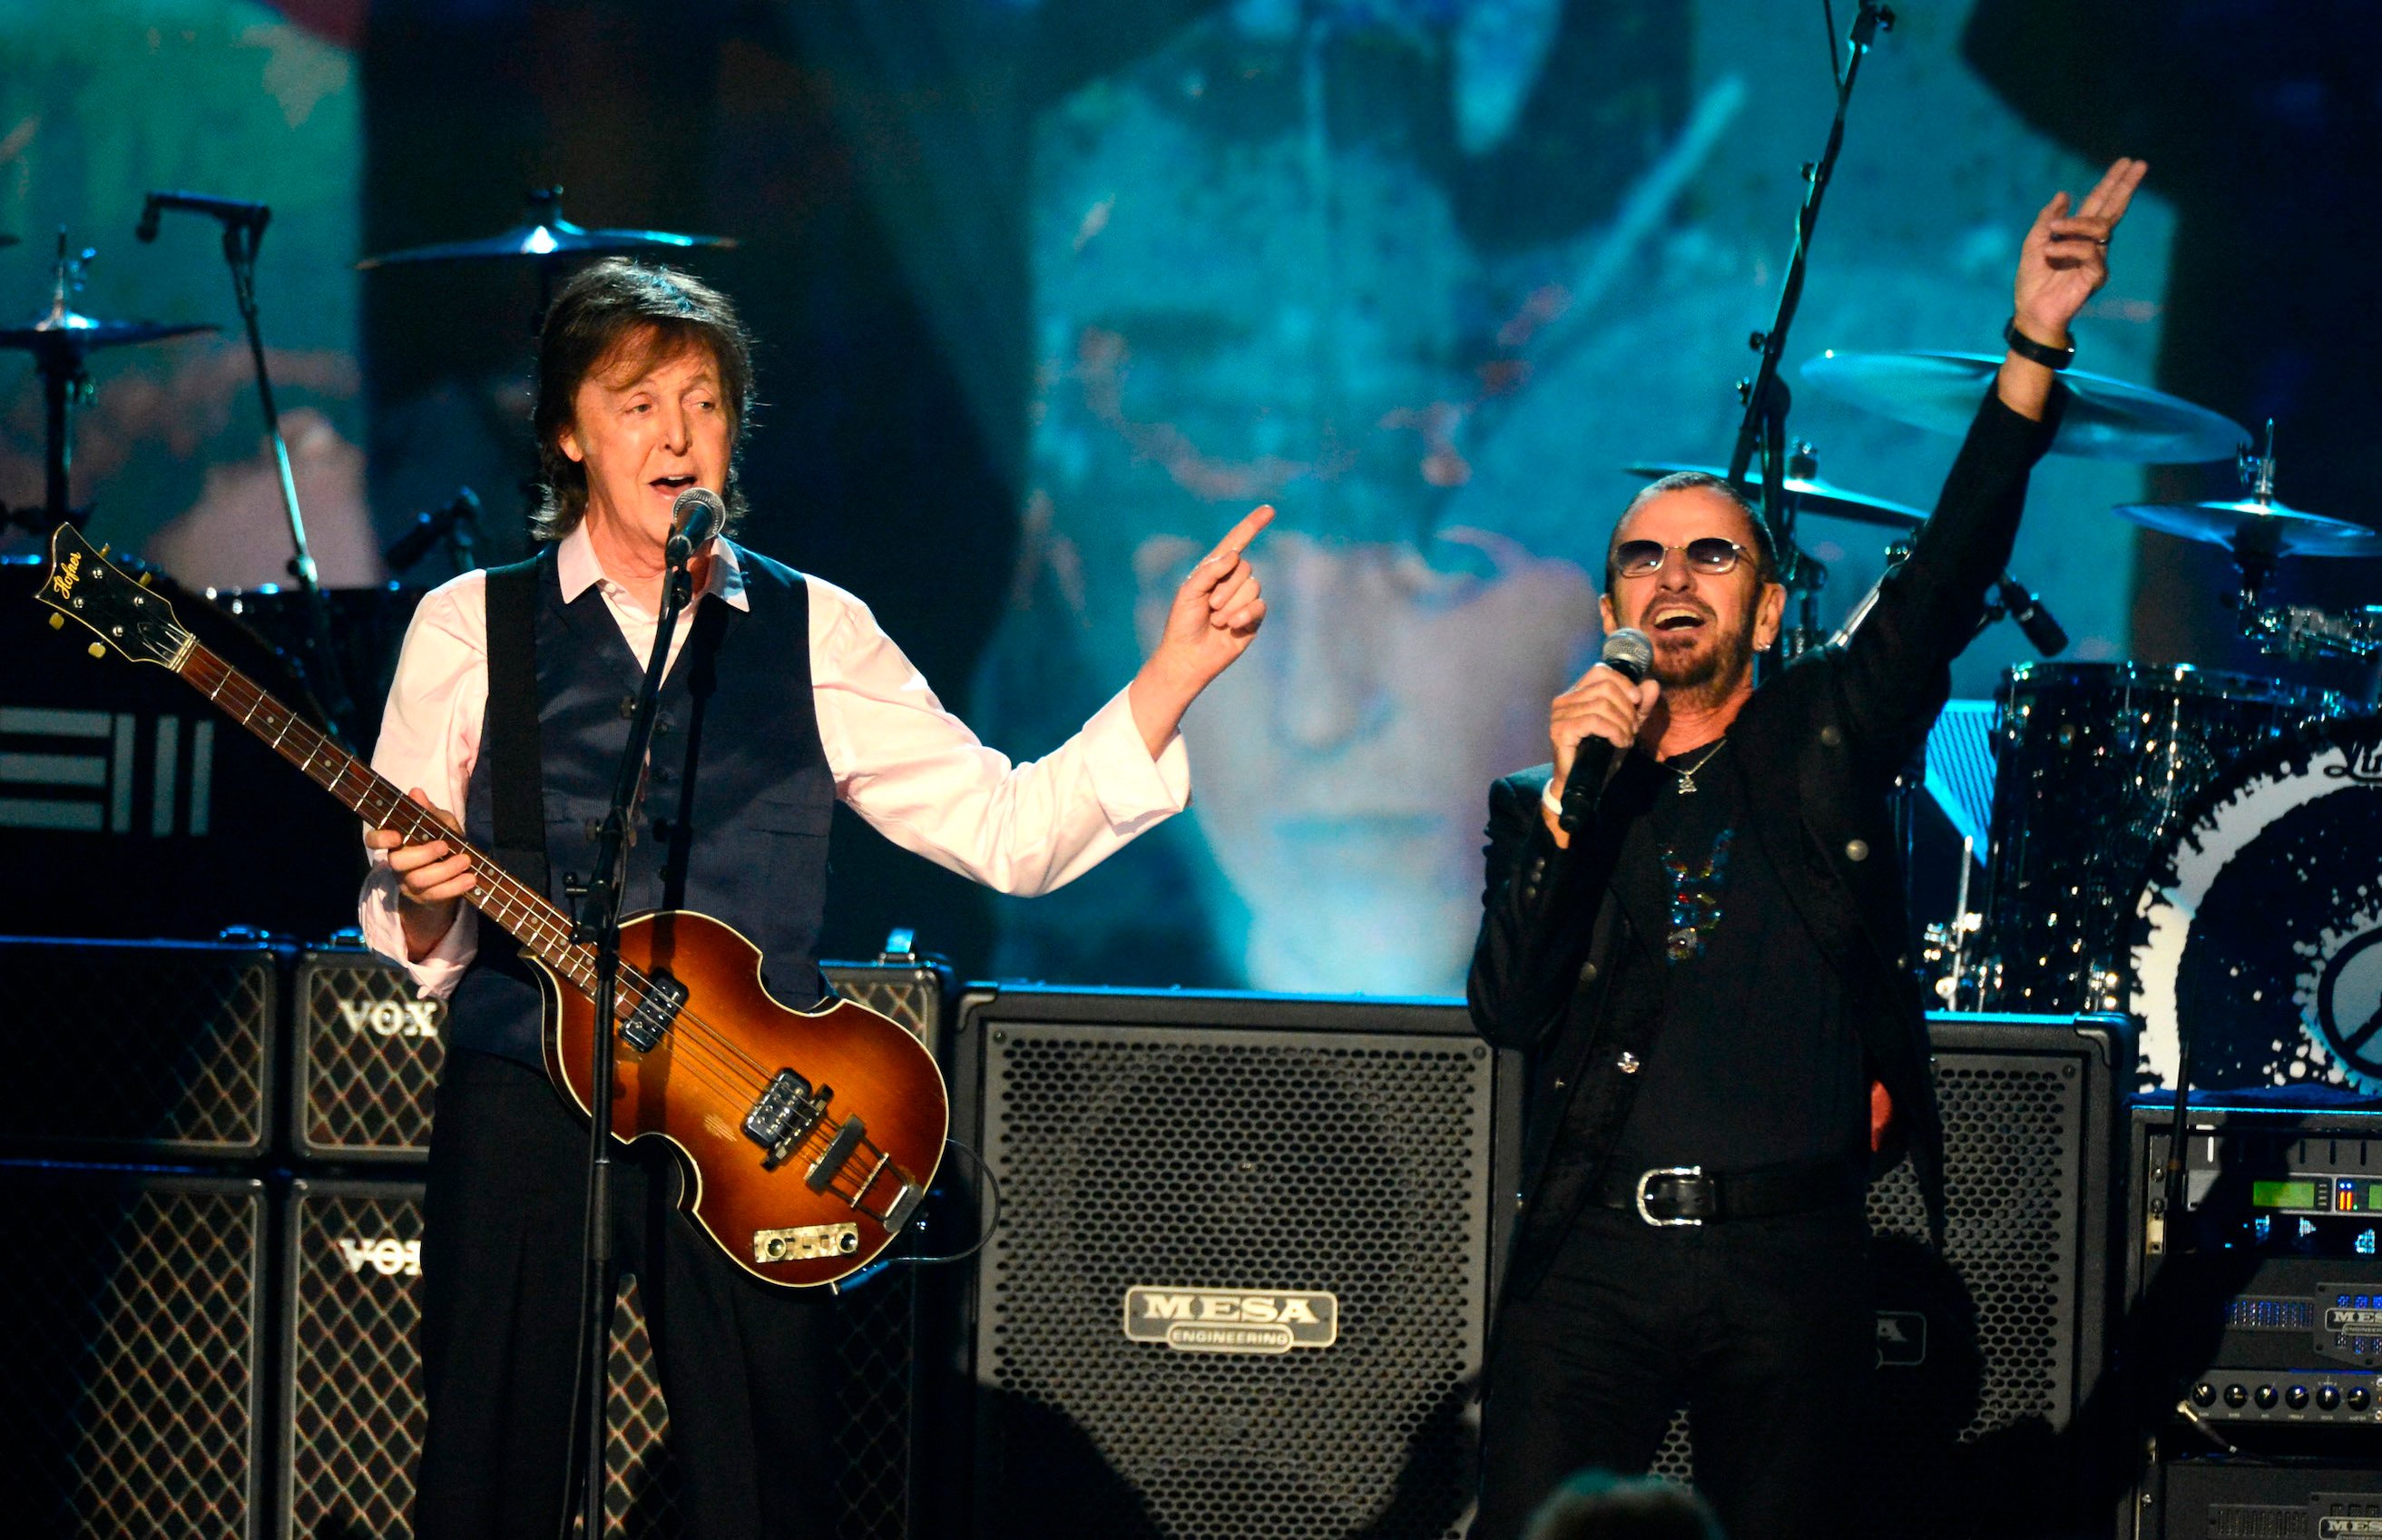 Paul McCartney and Ringo Starr perform at A GRAMMY Salute to The Beatles in Los Angeles, California